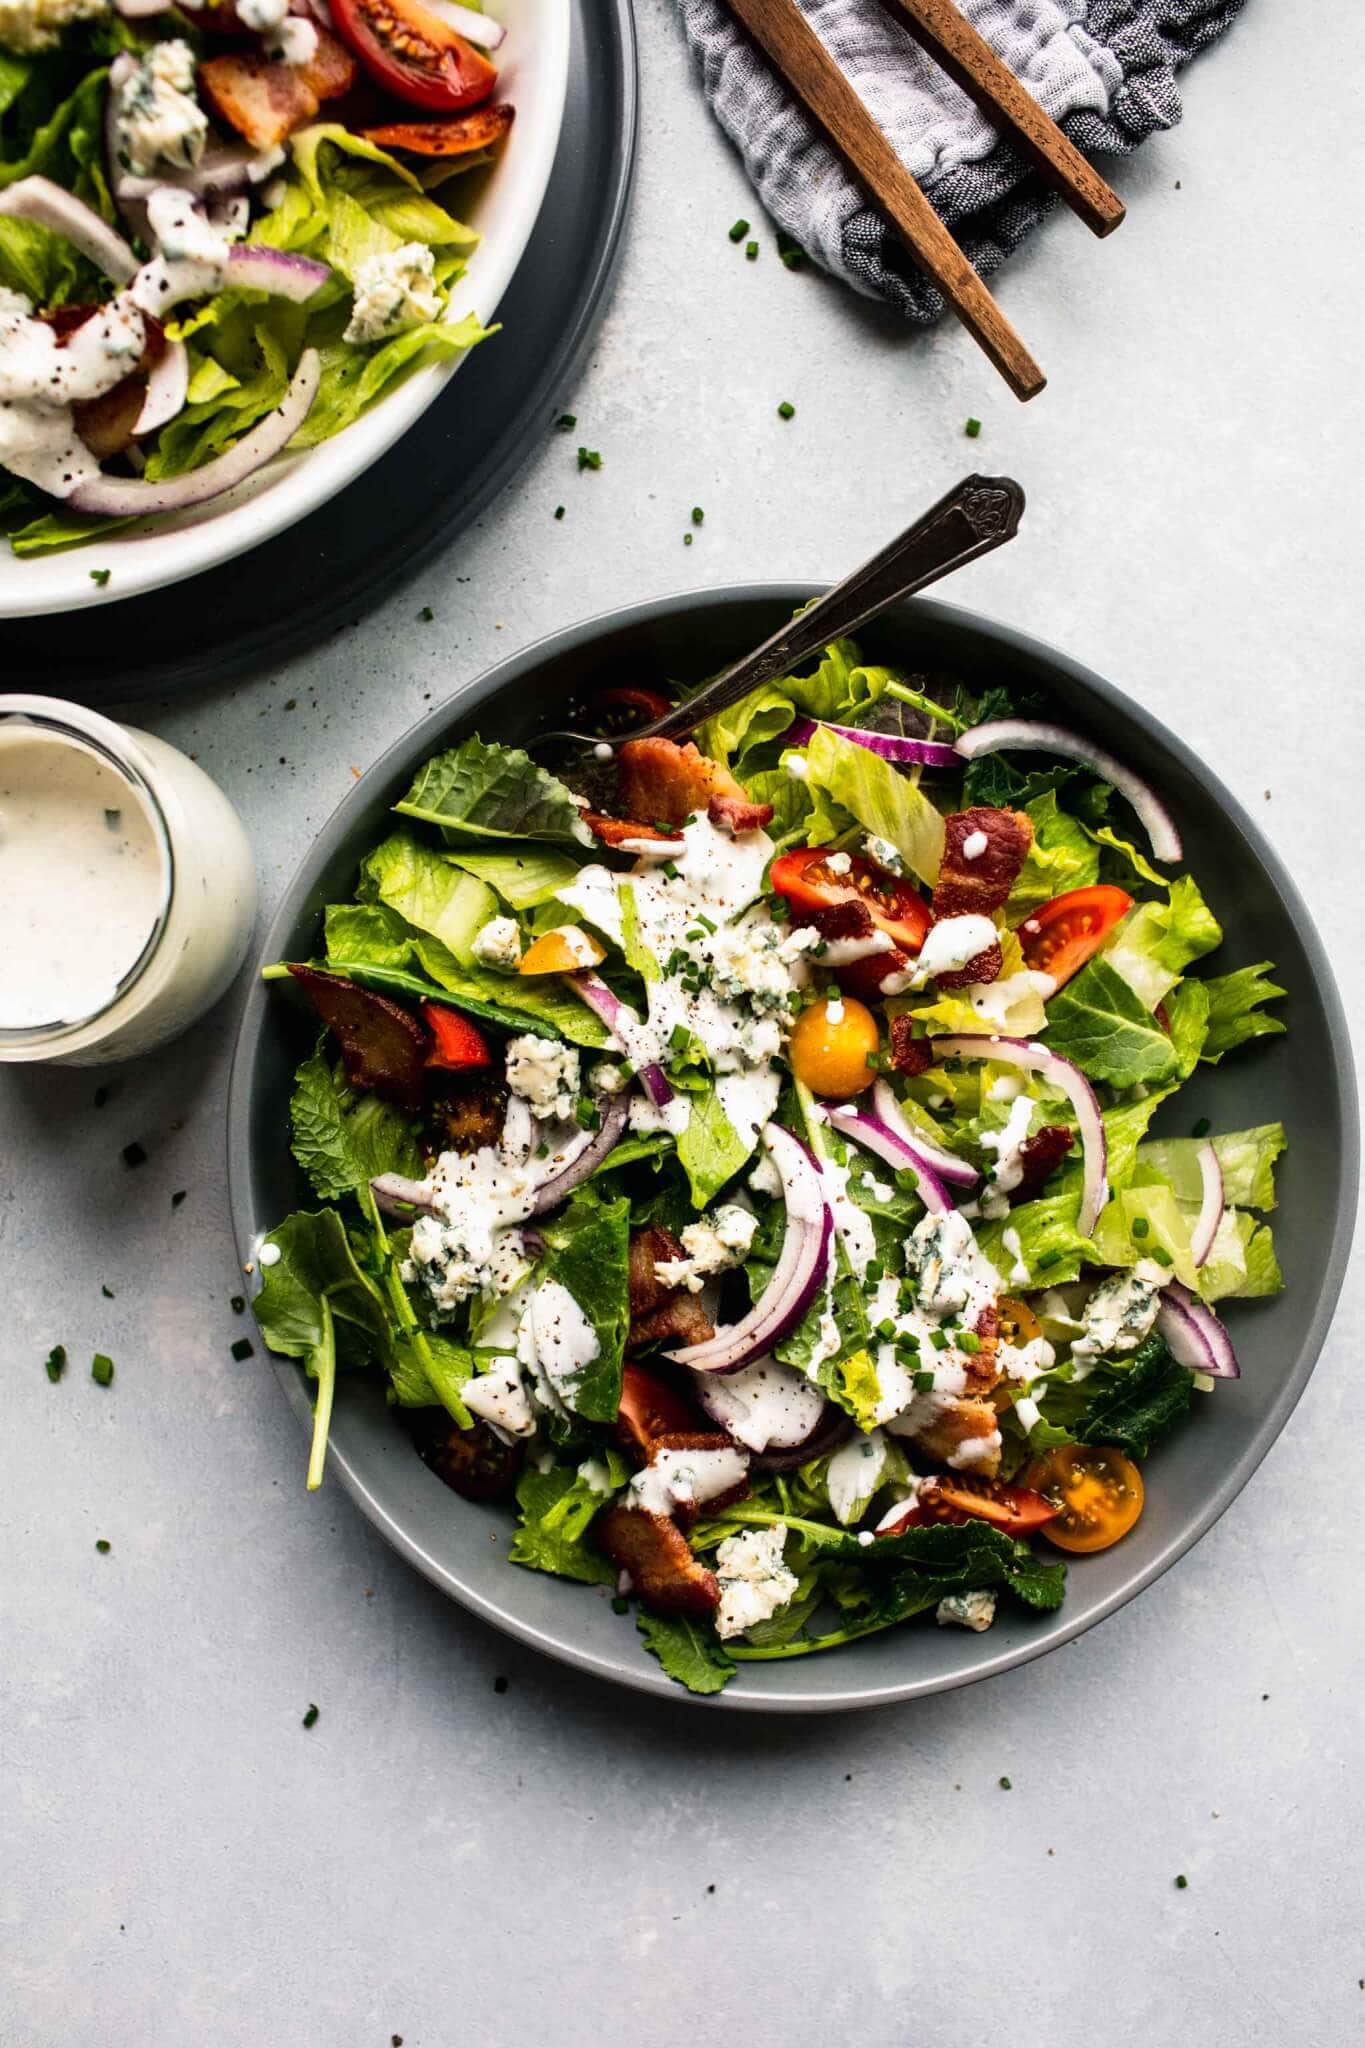 Green salad in grey bowl topped with red onions, tomatoes and blue cheese dressing, with serving utensils and small jar of dressing.